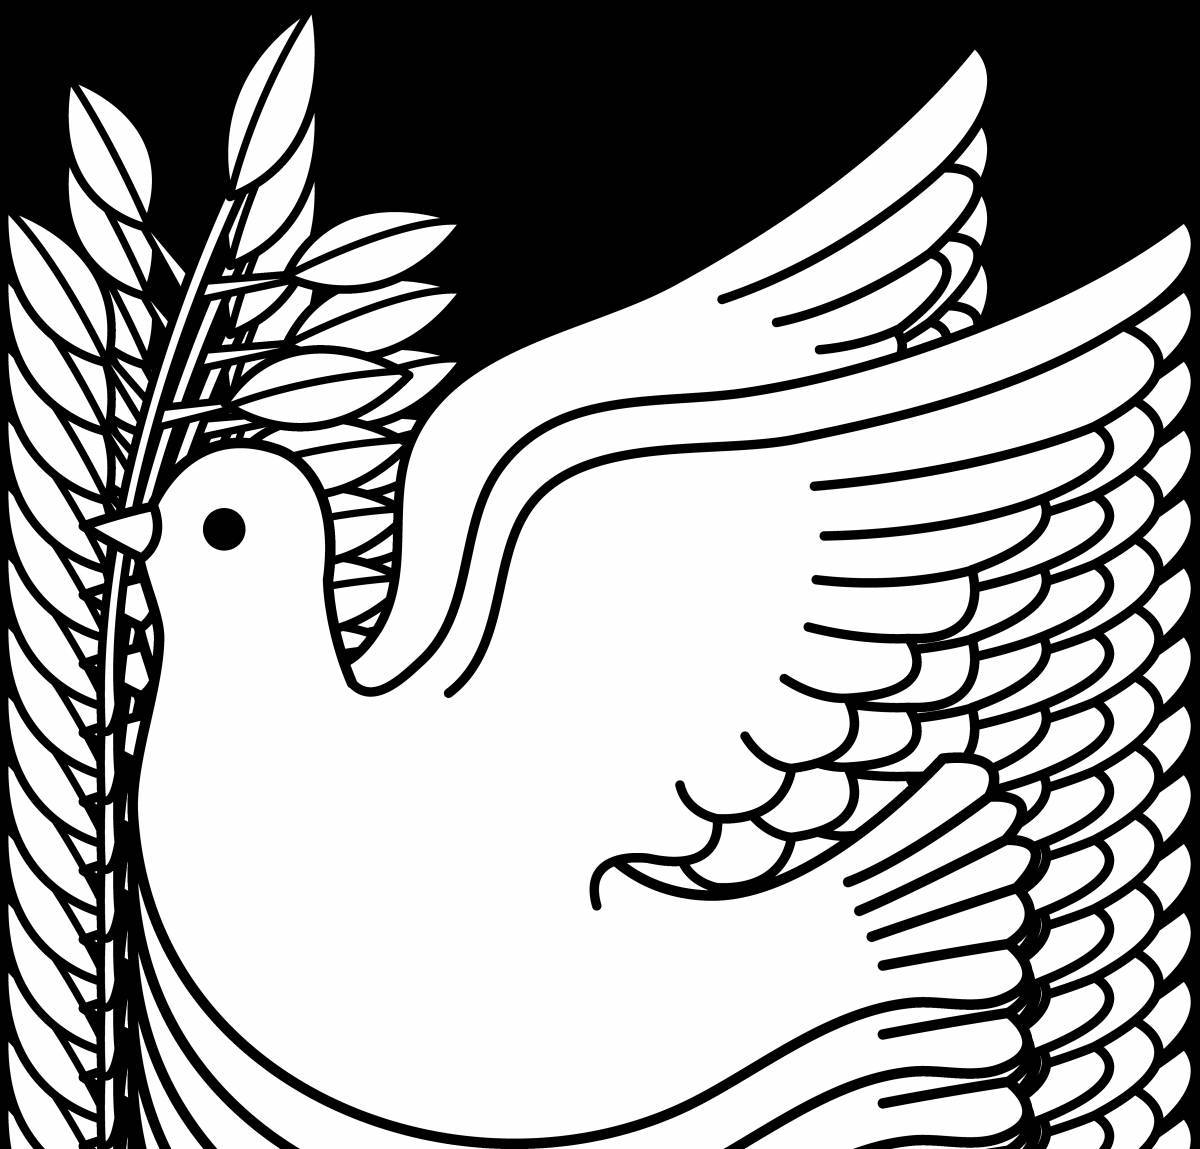 Great dove coloring book for kids